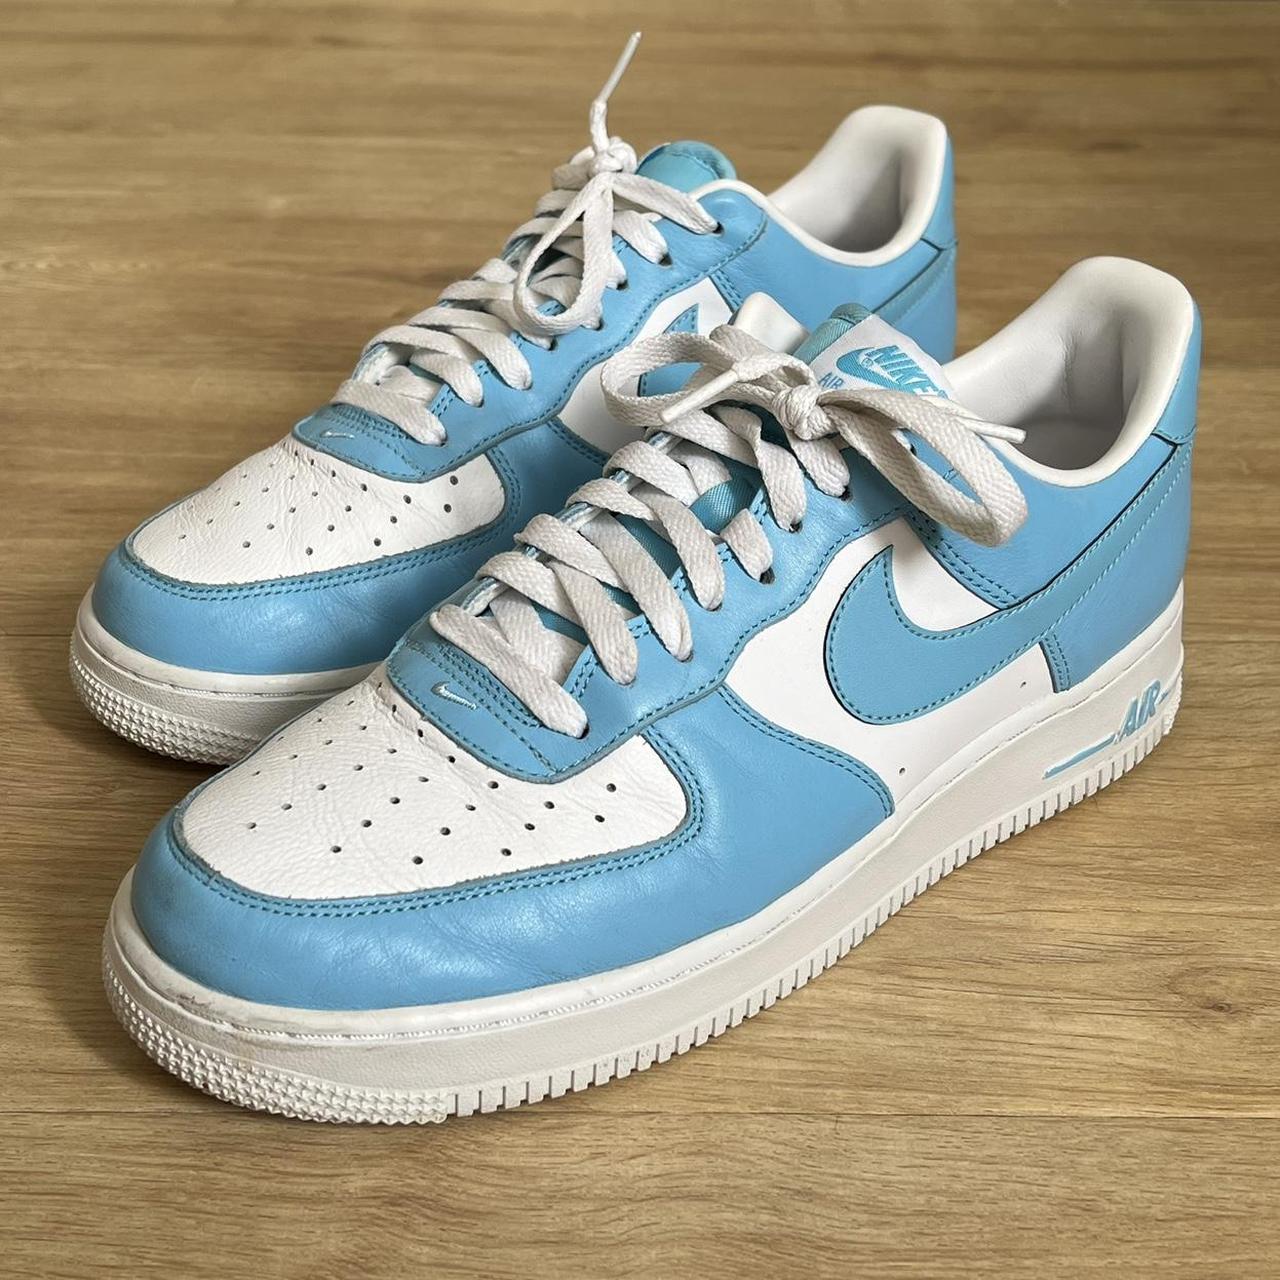 Nike Men's Blue and White Trainers | Depop